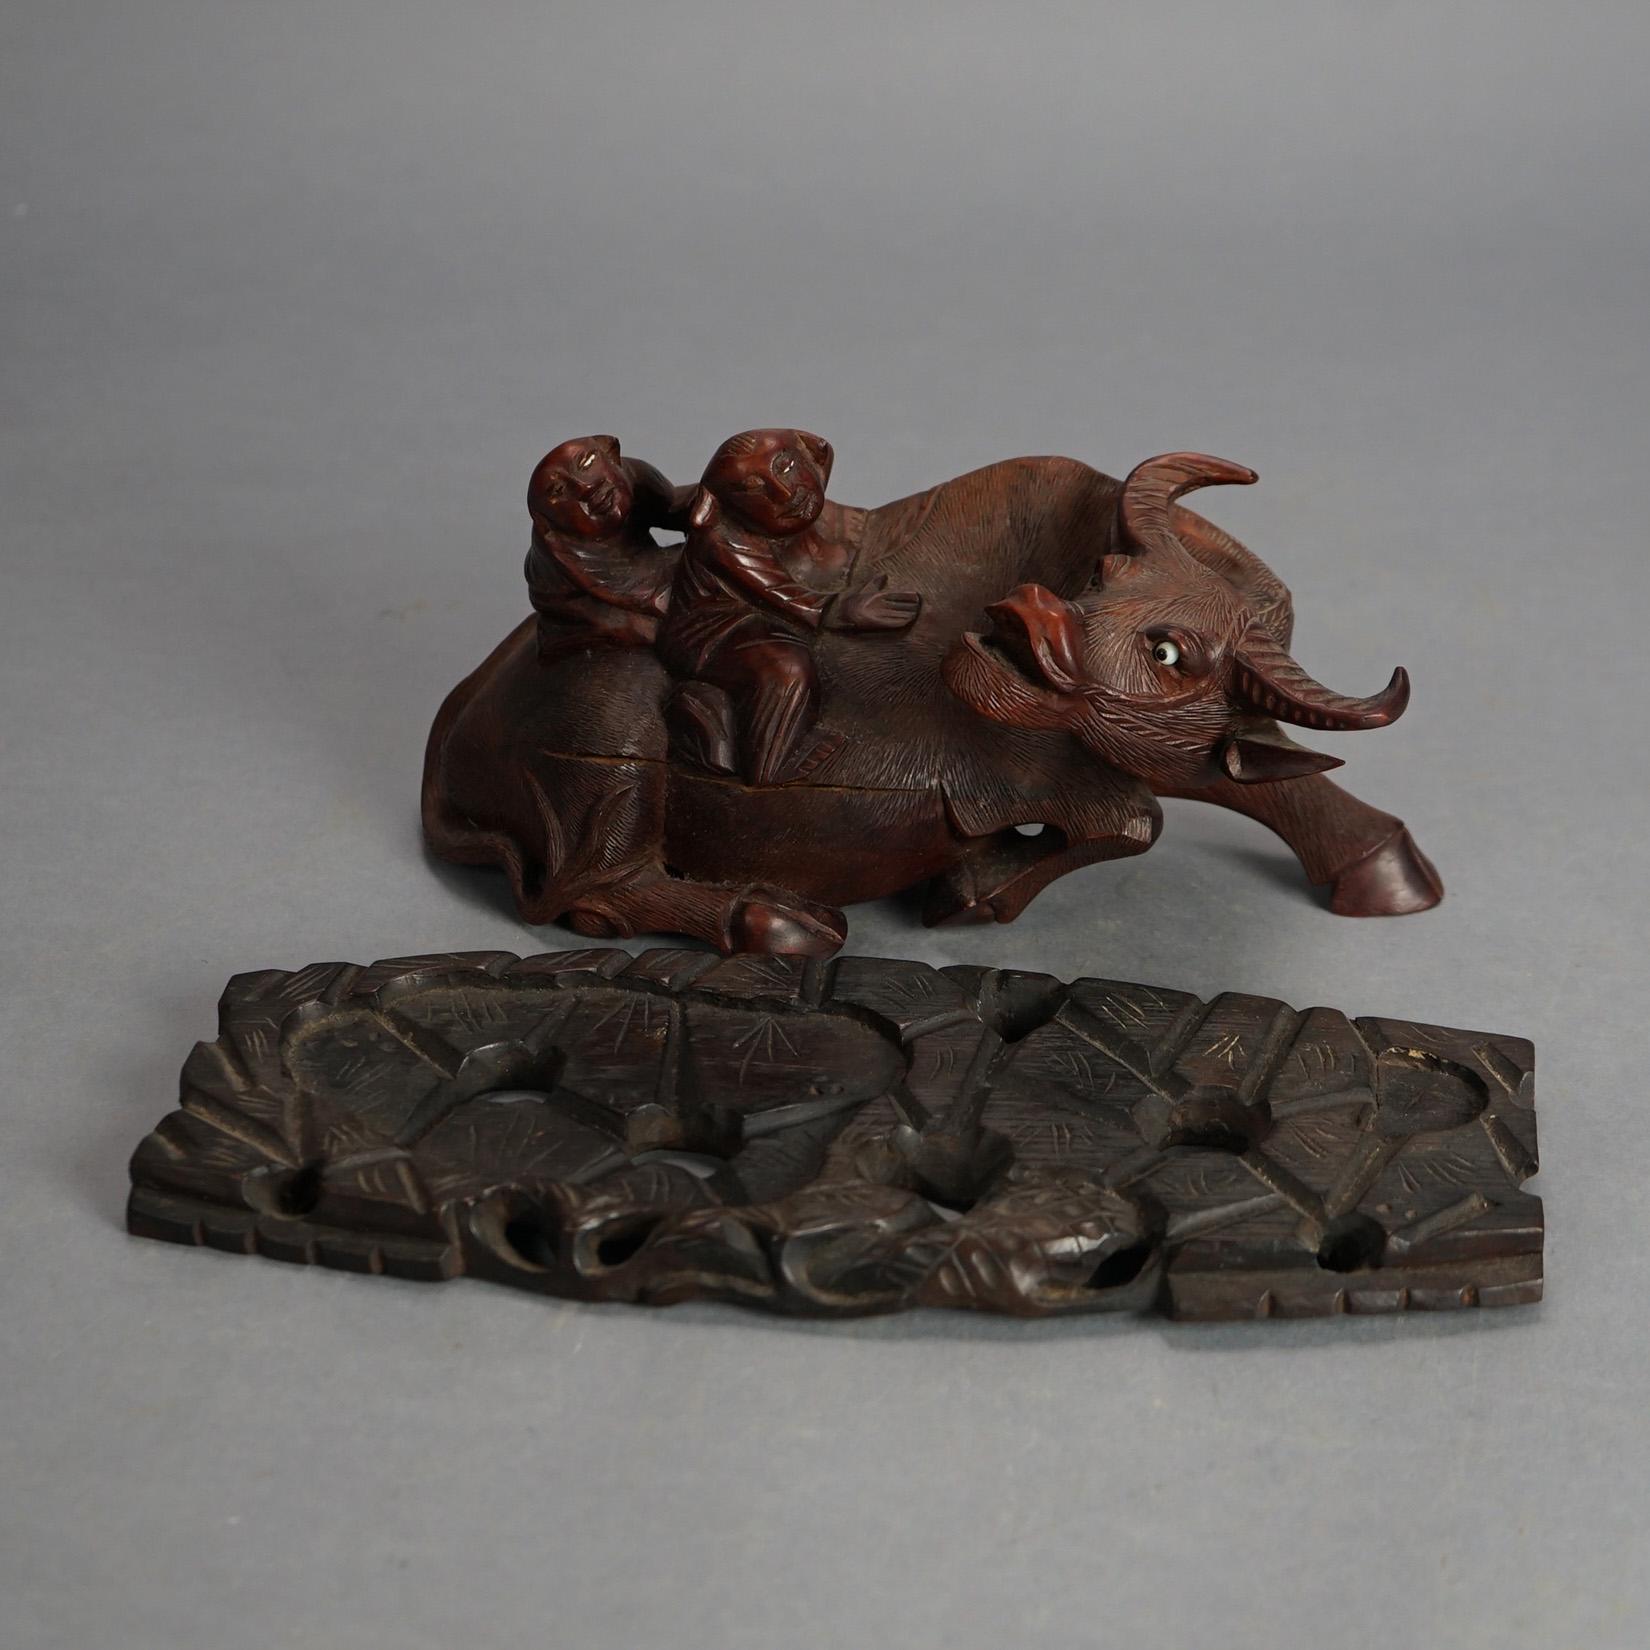 Antique Chinese Carved Wood Sculpture of Water Buffalo with Figures C1920 For Sale 2